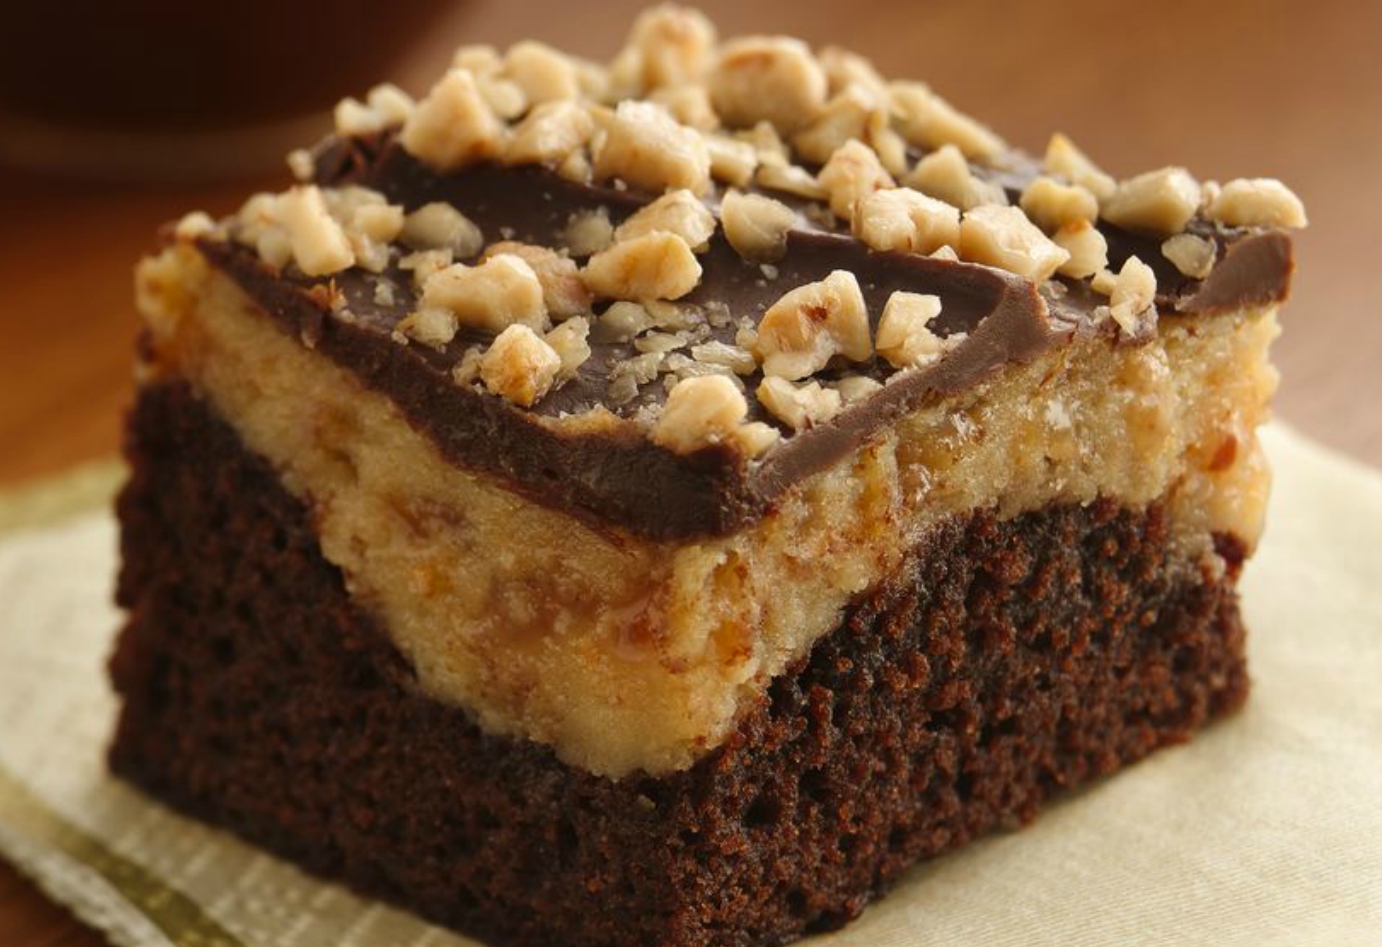 A rich dessert with a brownie based, topped with peanut butter, cream cheese, toffee bits and chocolate.